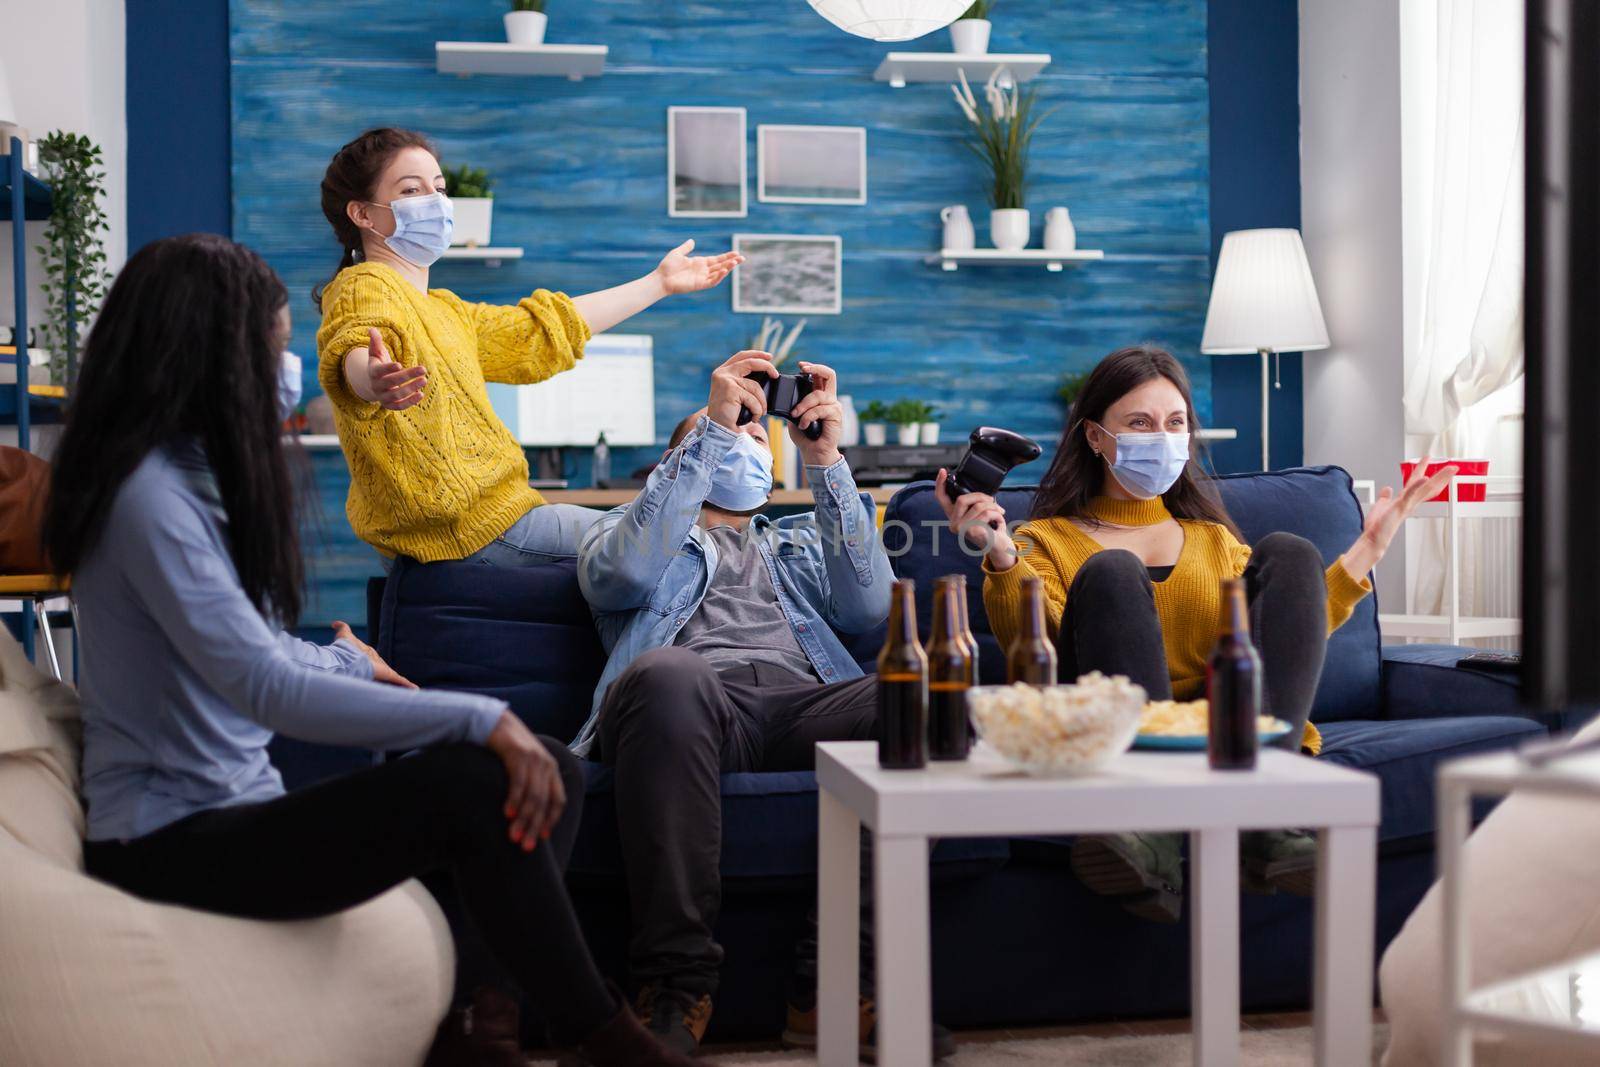 Happy cheerful woman screaming after wining gaming competiton with multiethnic friends in home living room with face mask preventing coronavirus spreading in time of global pandemic.